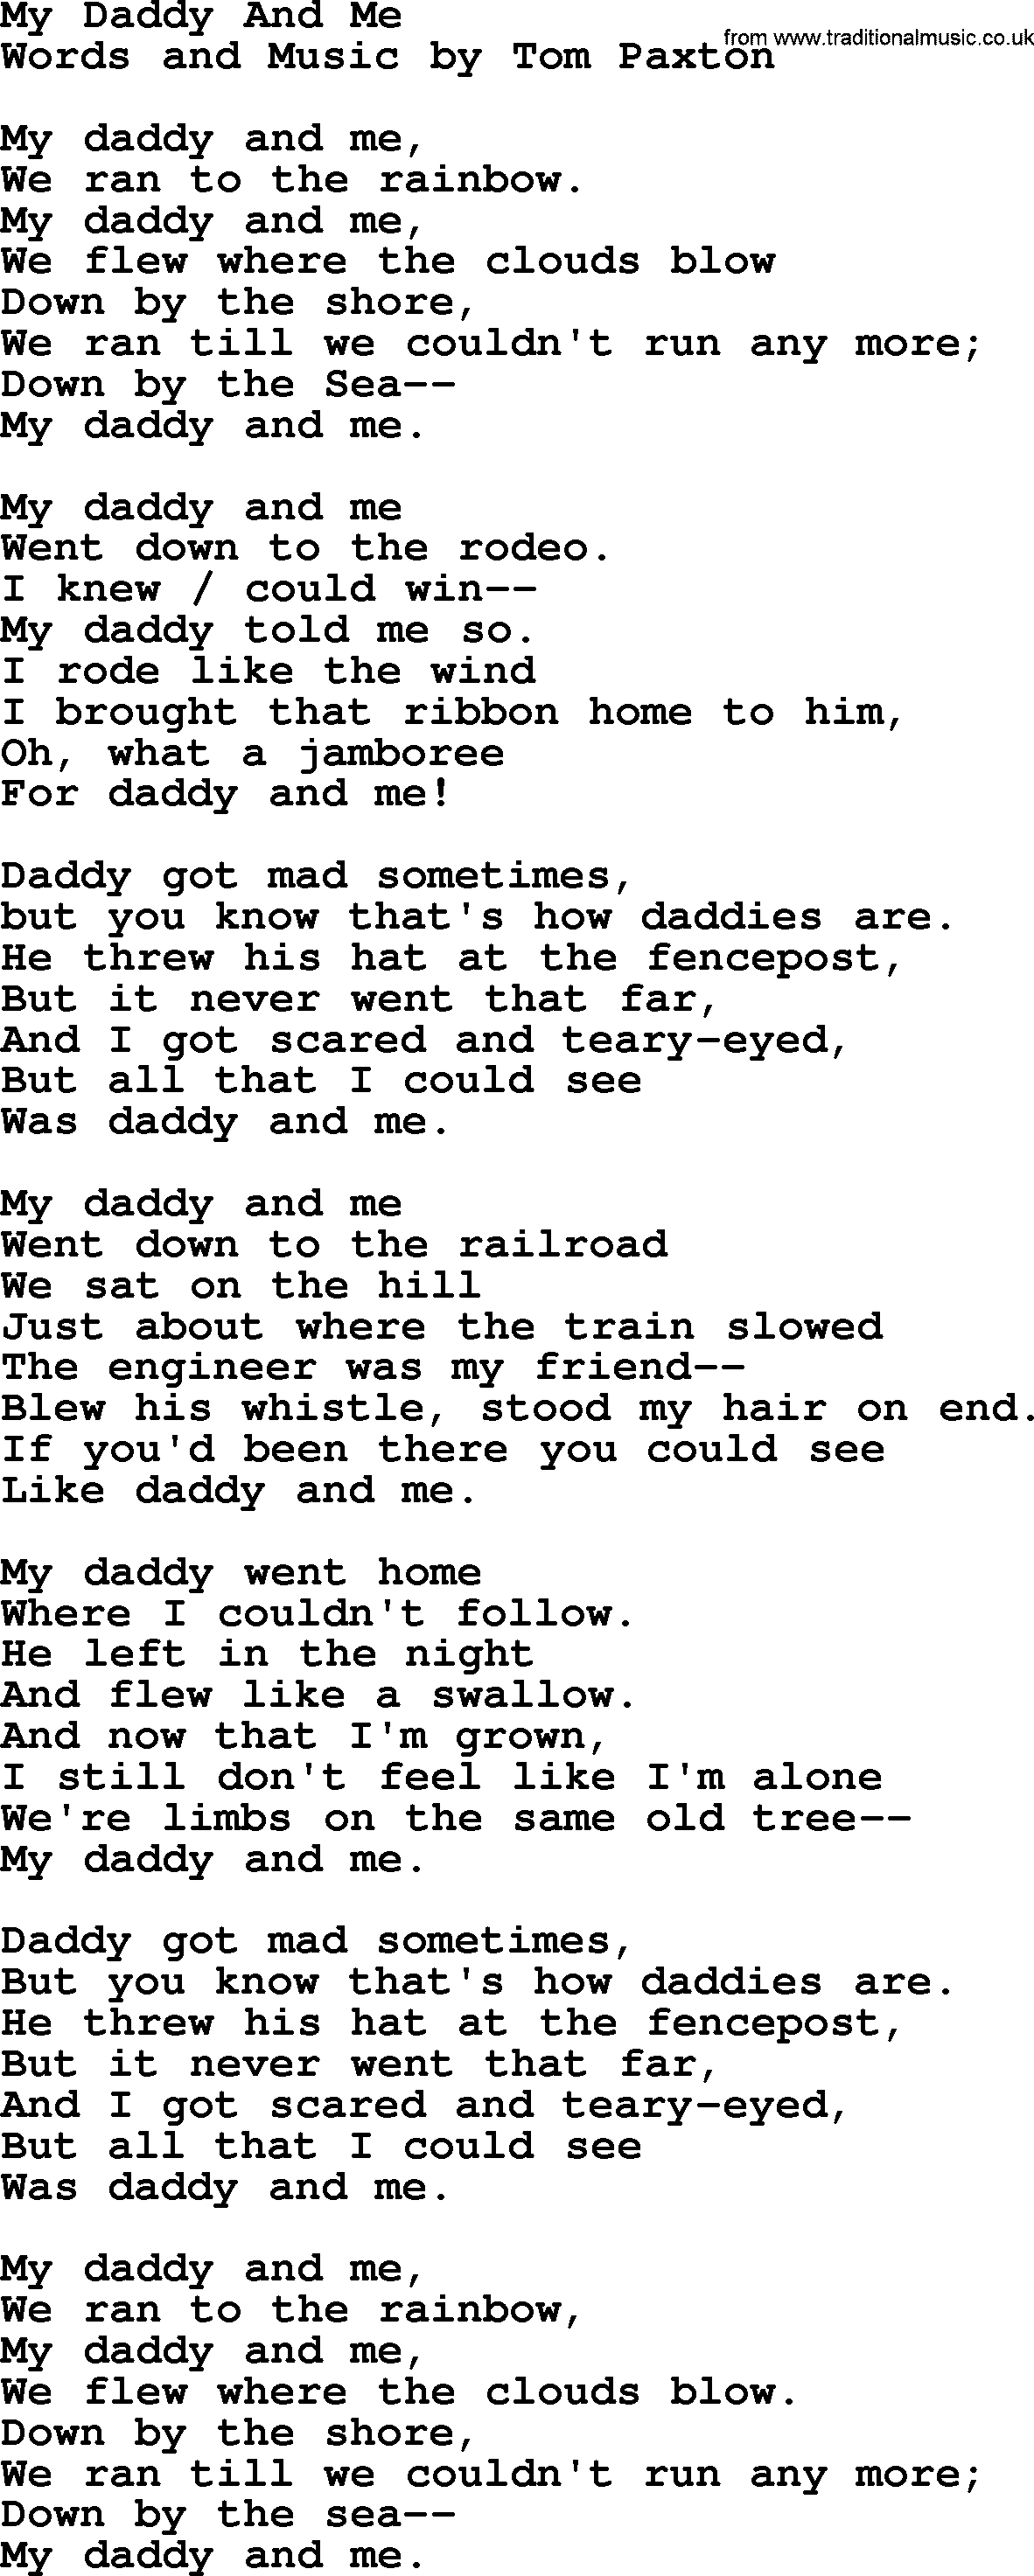 Tom Paxton song: My Daddy And Me, lyrics